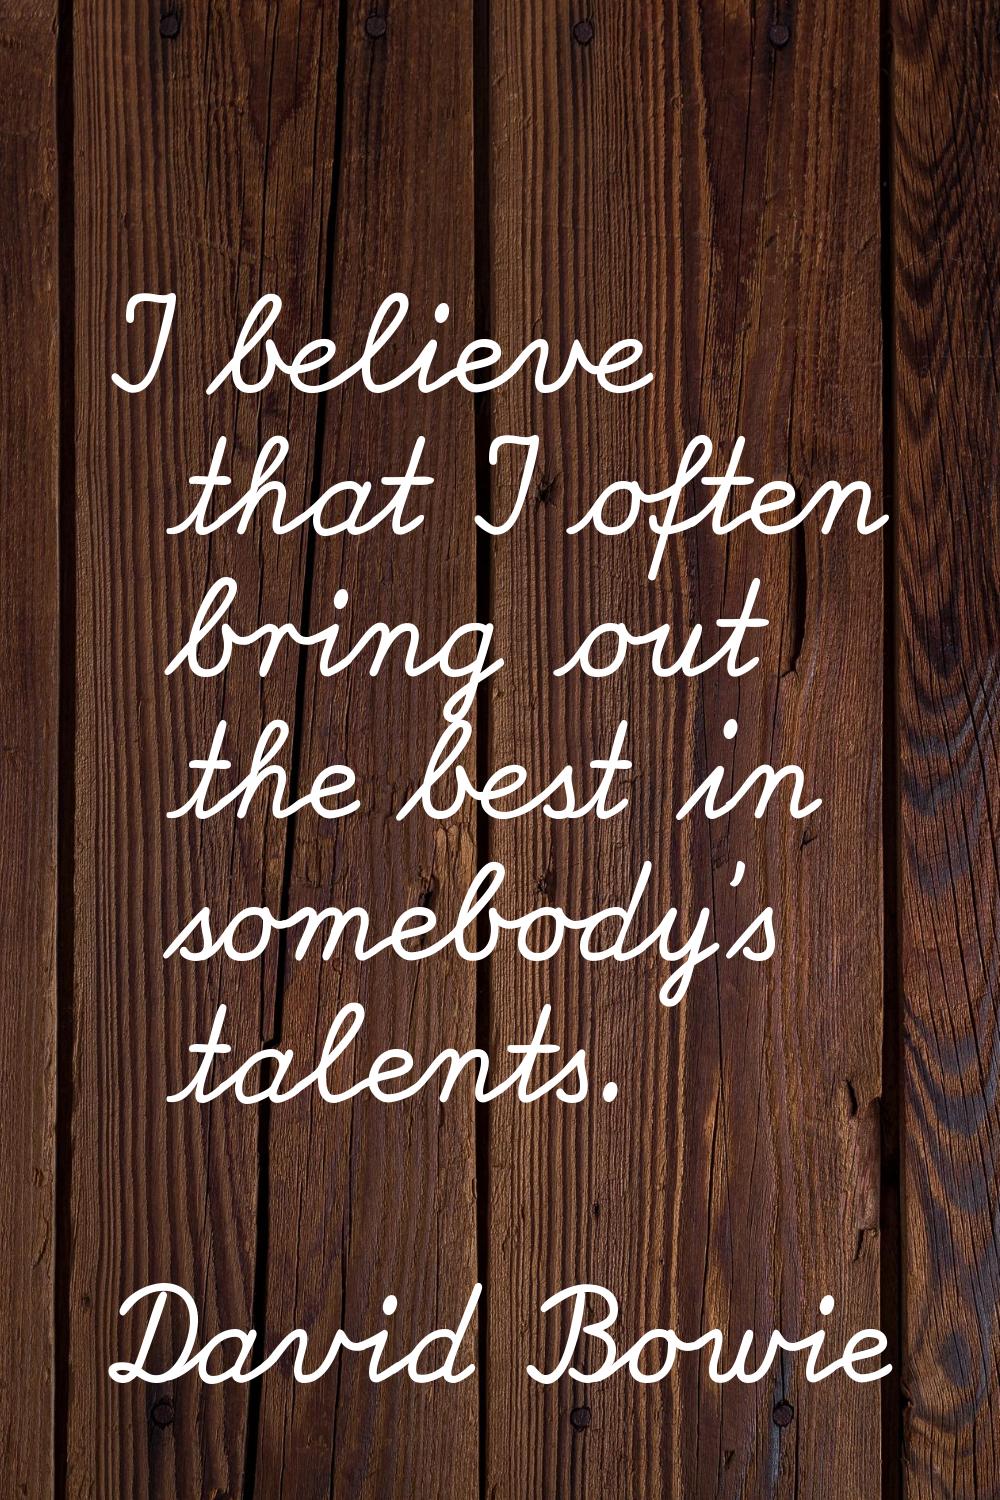 I believe that I often bring out the best in somebody's talents.